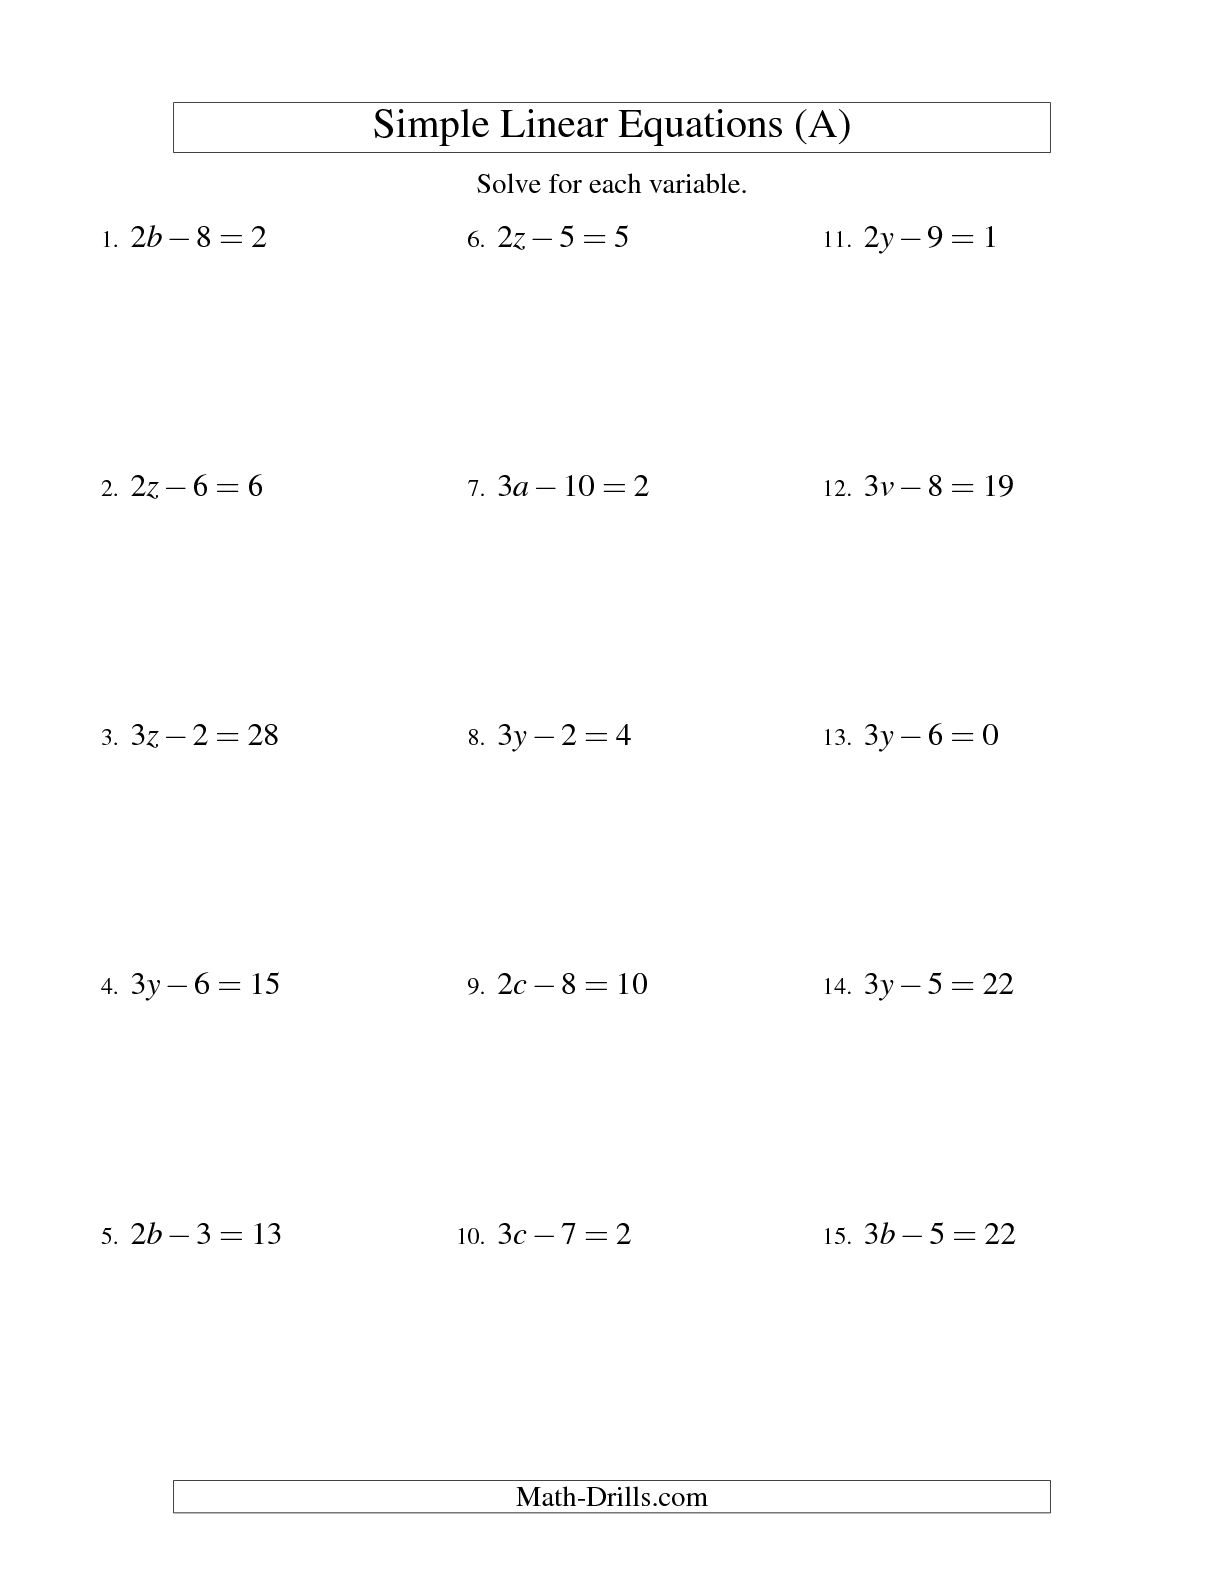 exercise-3-13-solving-by-cross-multiplication-method-solving-simultaneous-linear-equations-in